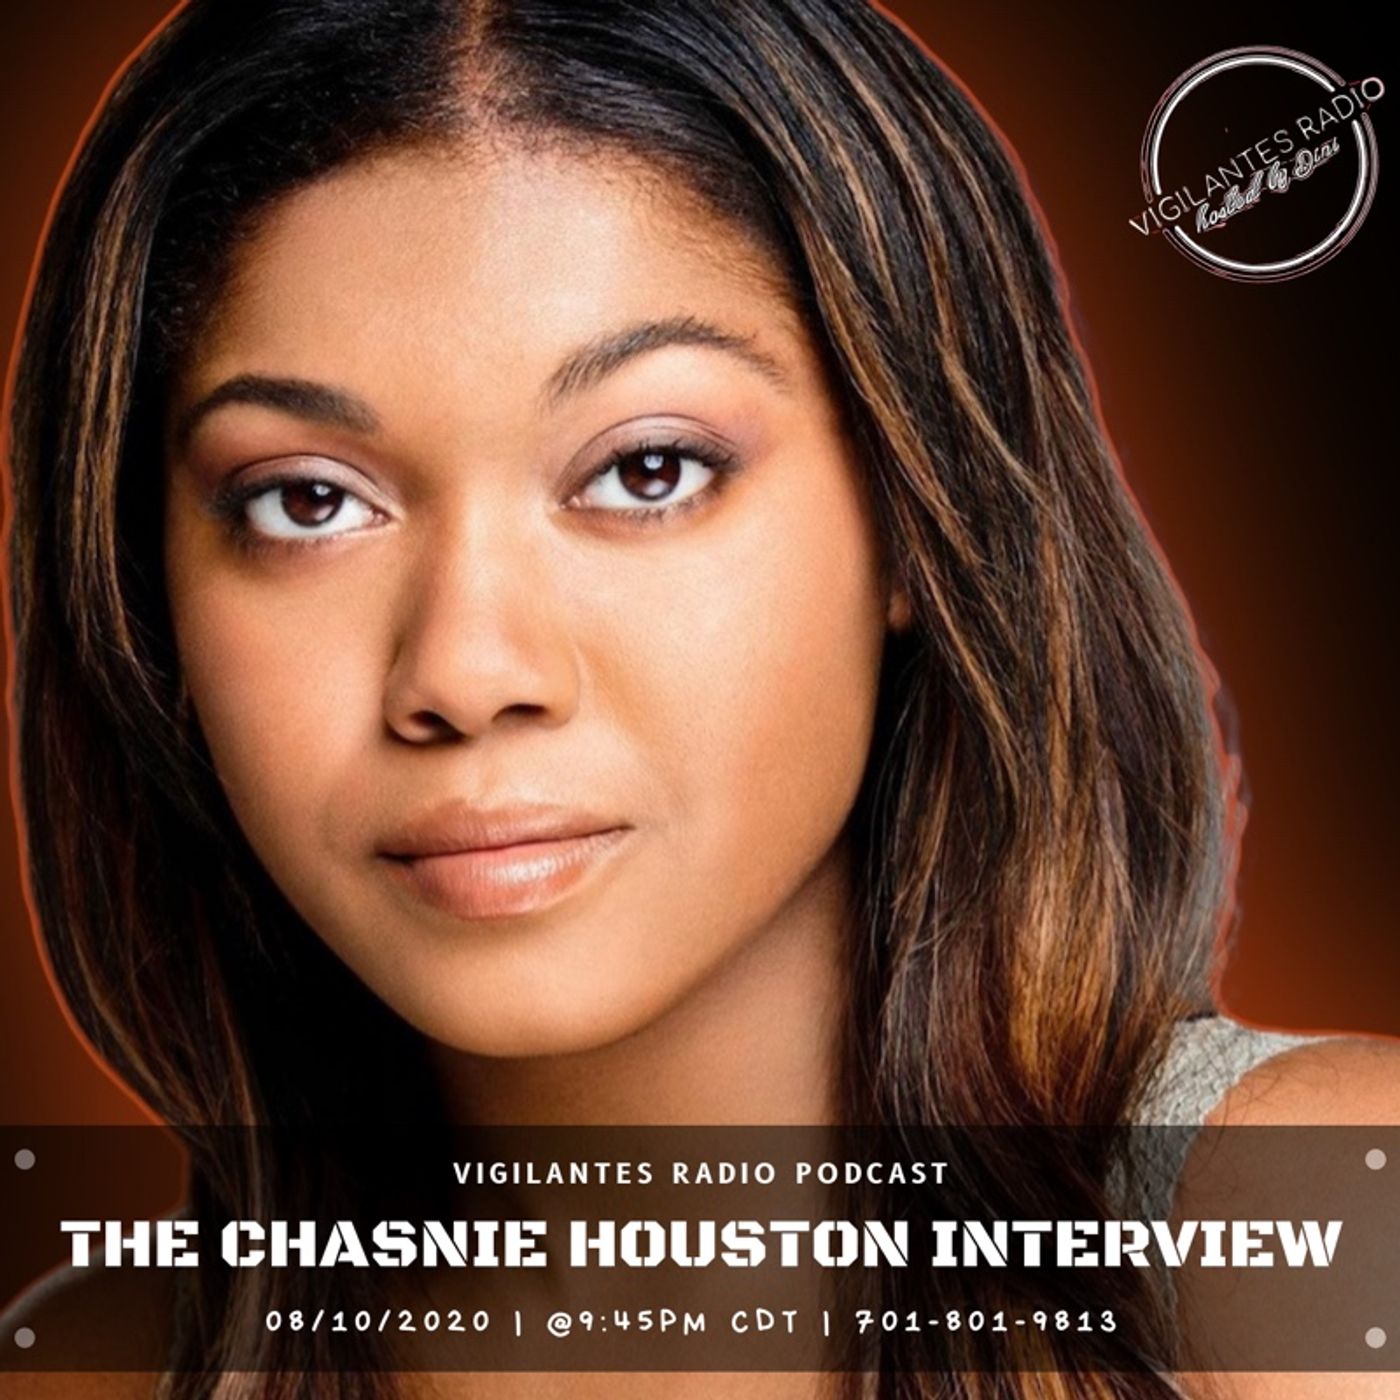 The Chasnie Houston Interview. Image